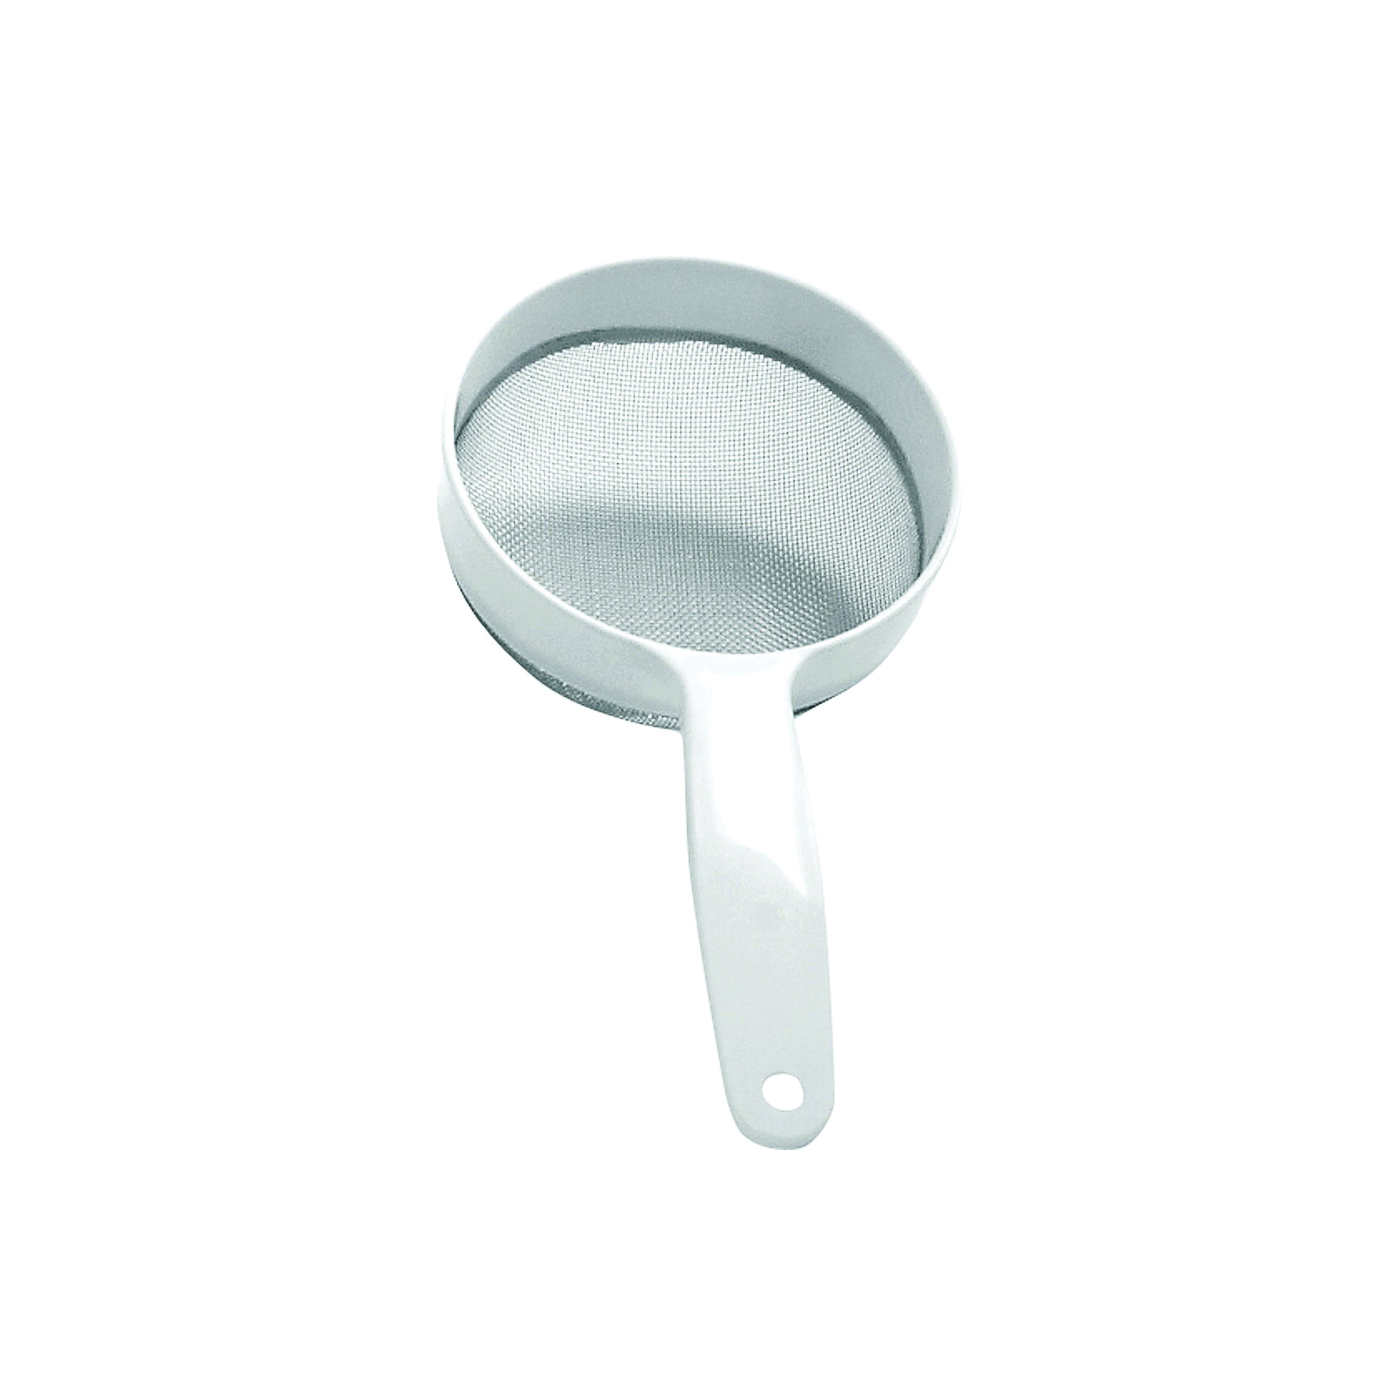 Norpro 2135 Strainer, Stainless Steel, 5 in Dia, Plastic Handle - 1